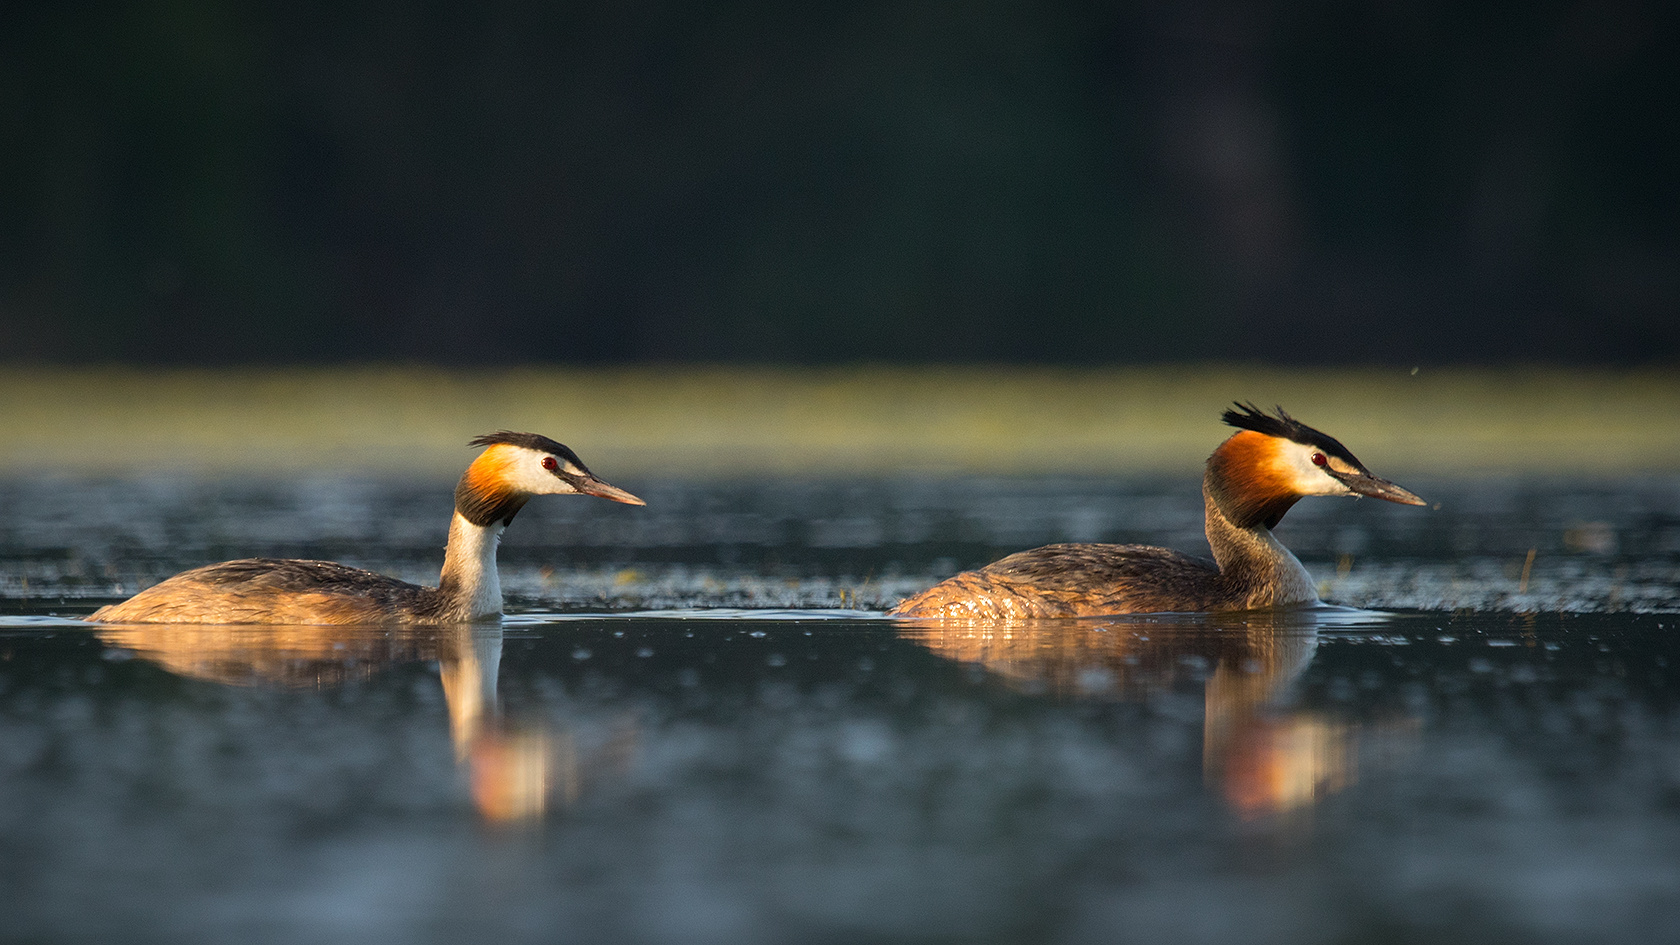 Great Crested Grebe 